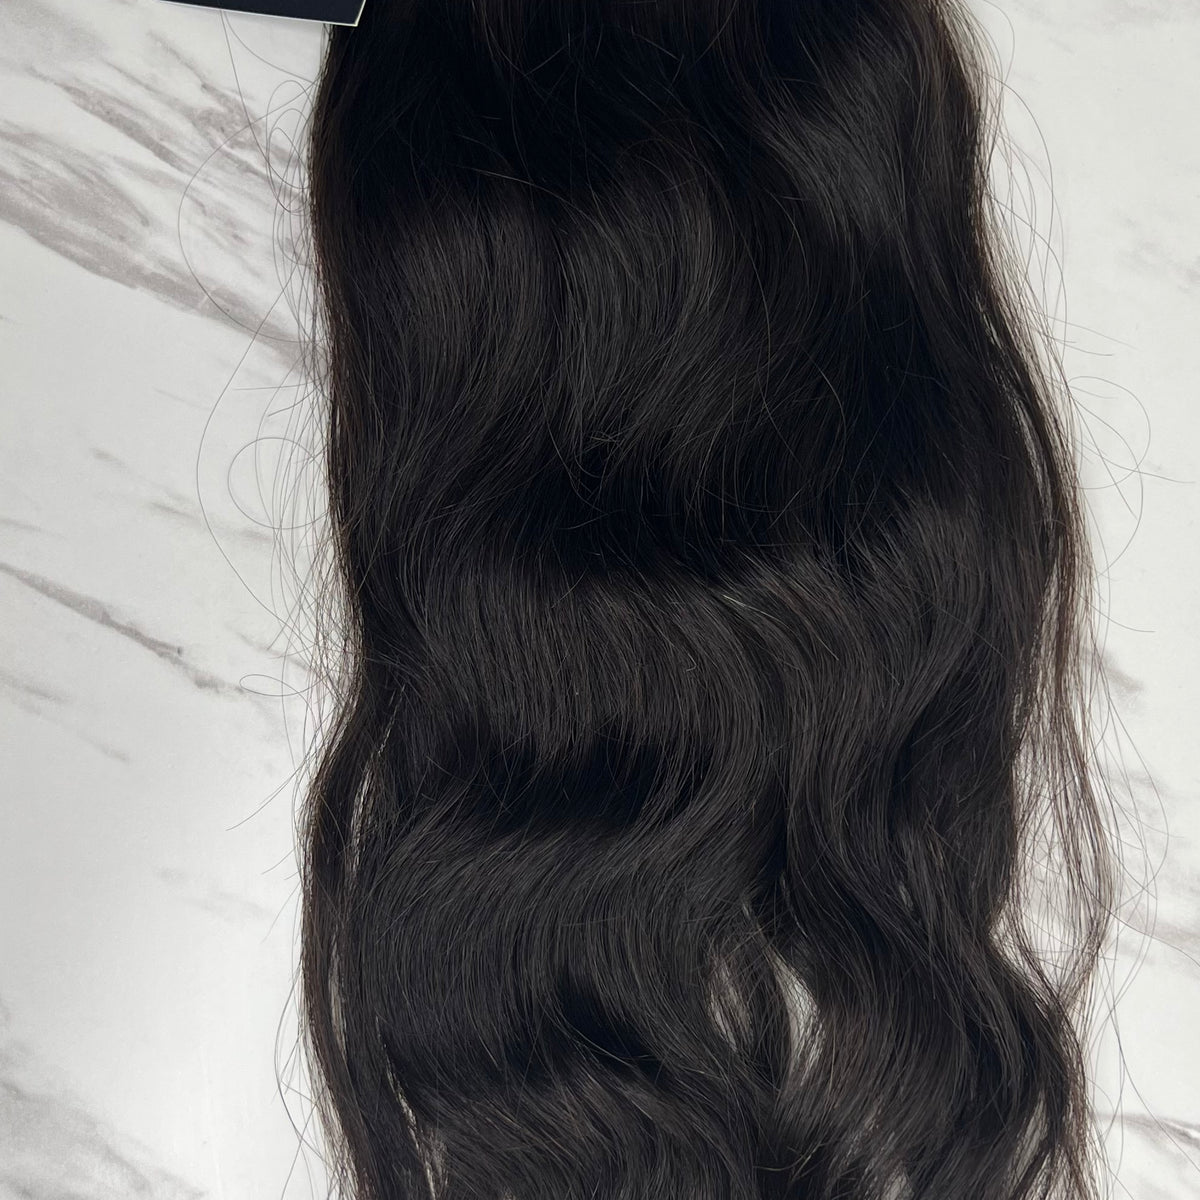 Indian Body Wave